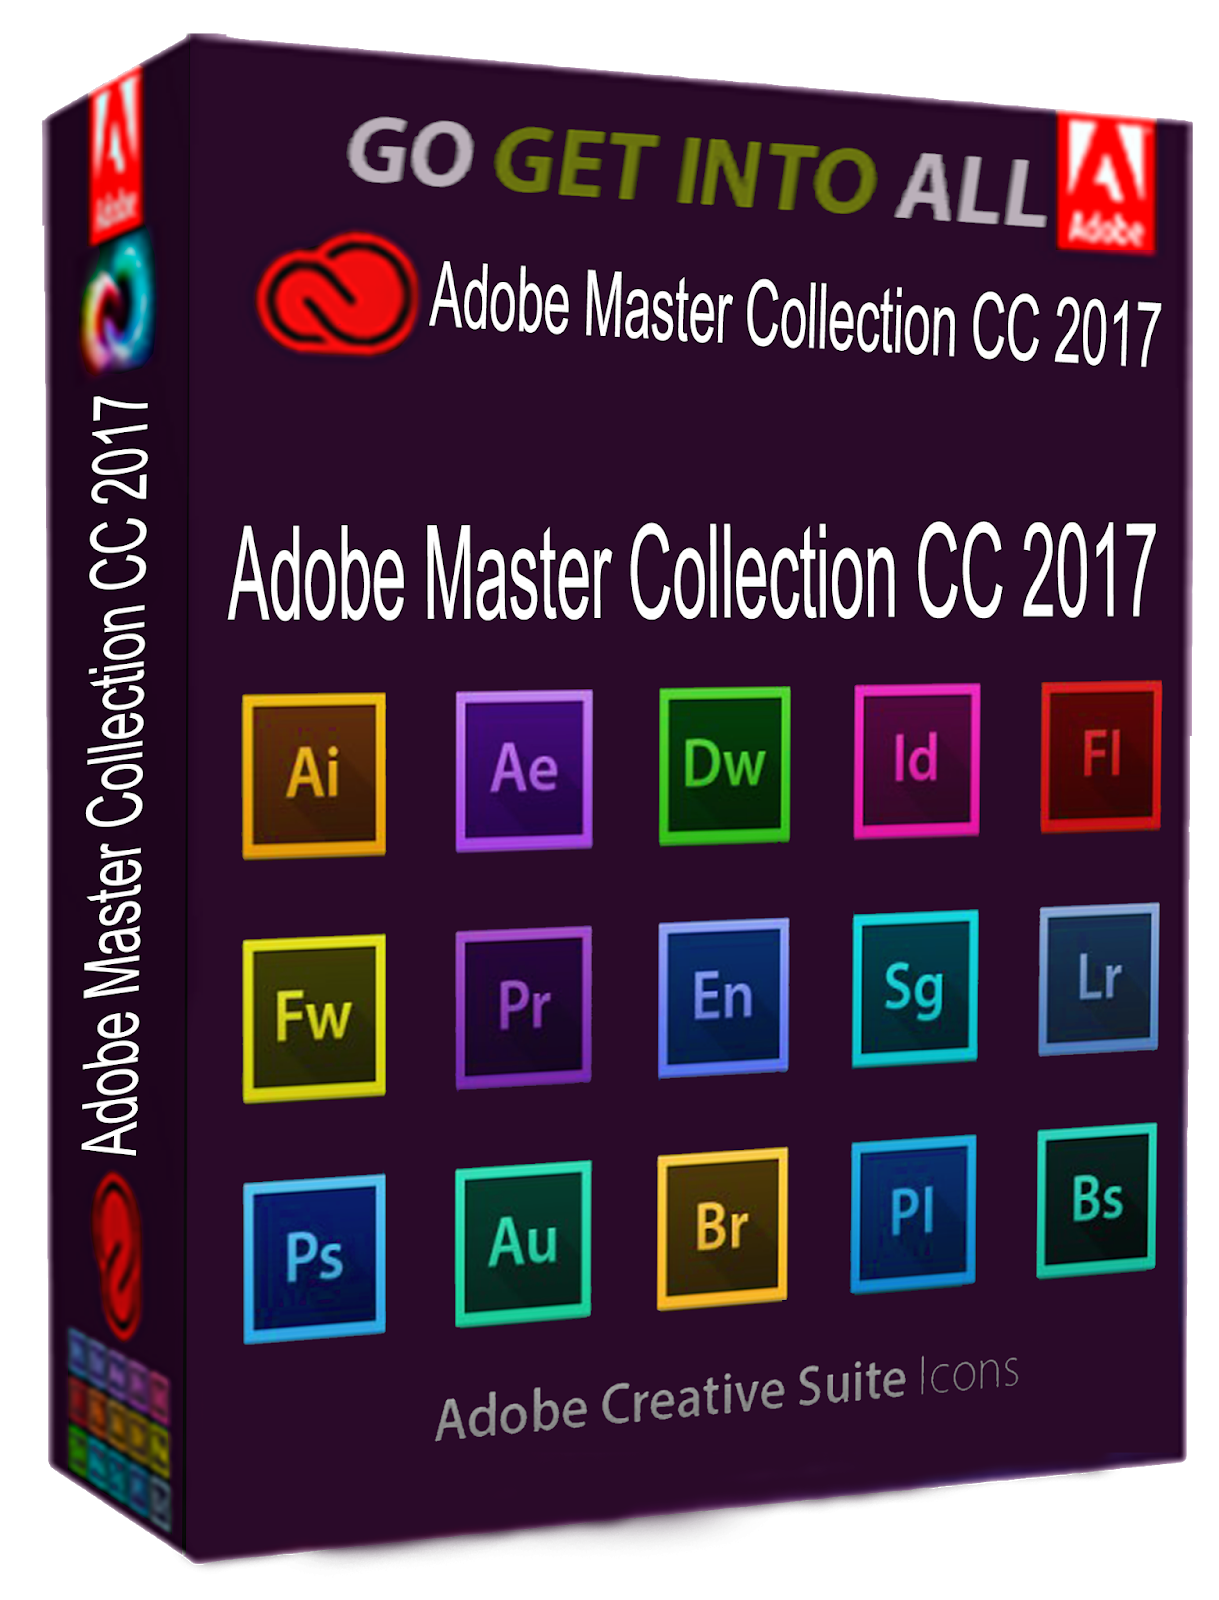 adobe master collection cc 2021 full version free download